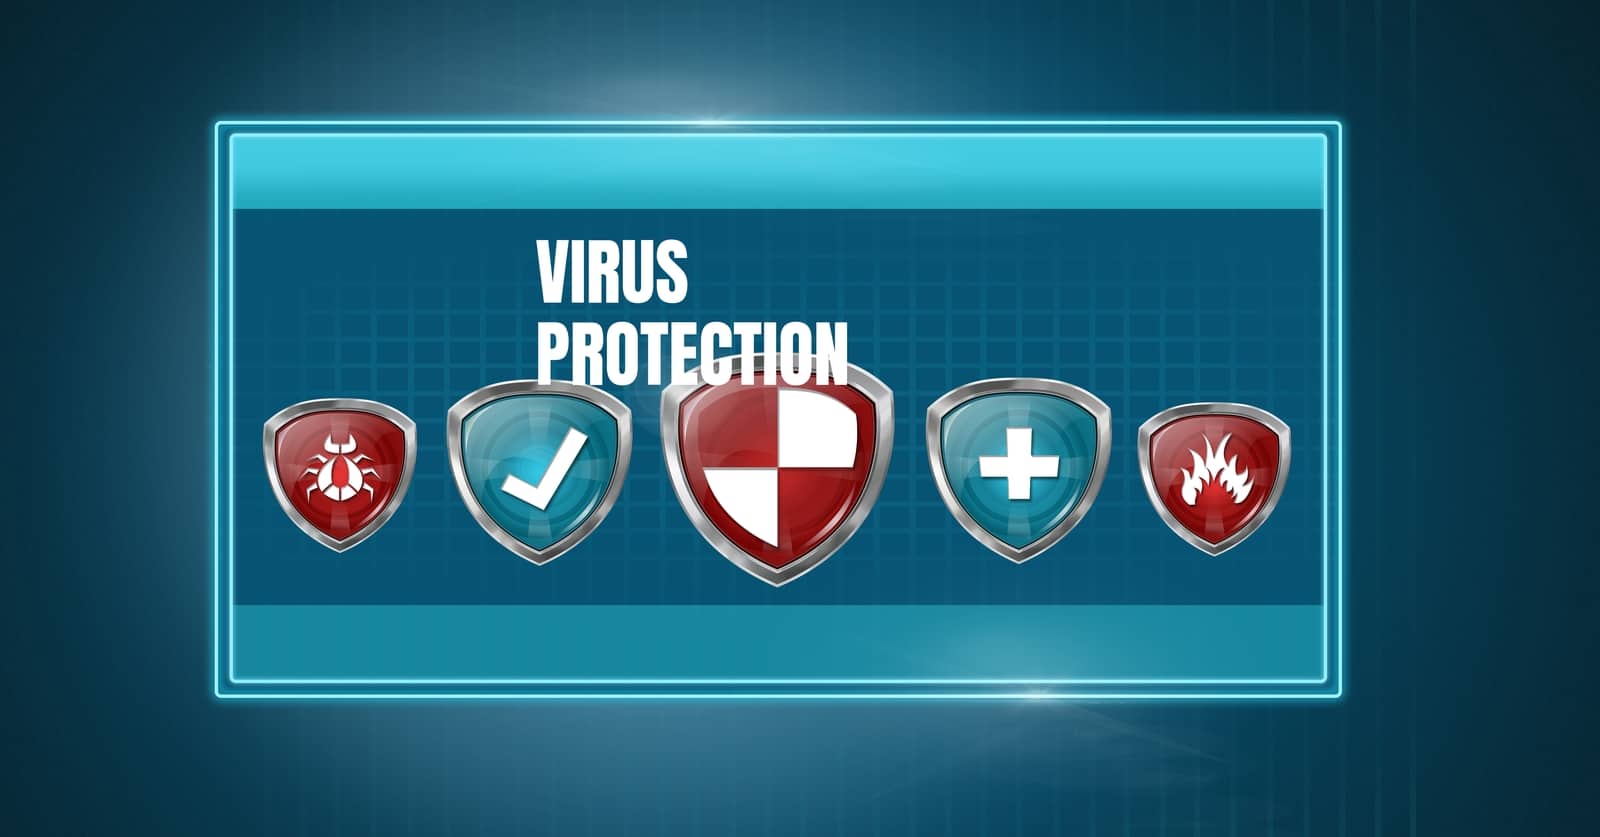 Installing an antivirus on your computer will ensure youre safe against cyberattacks